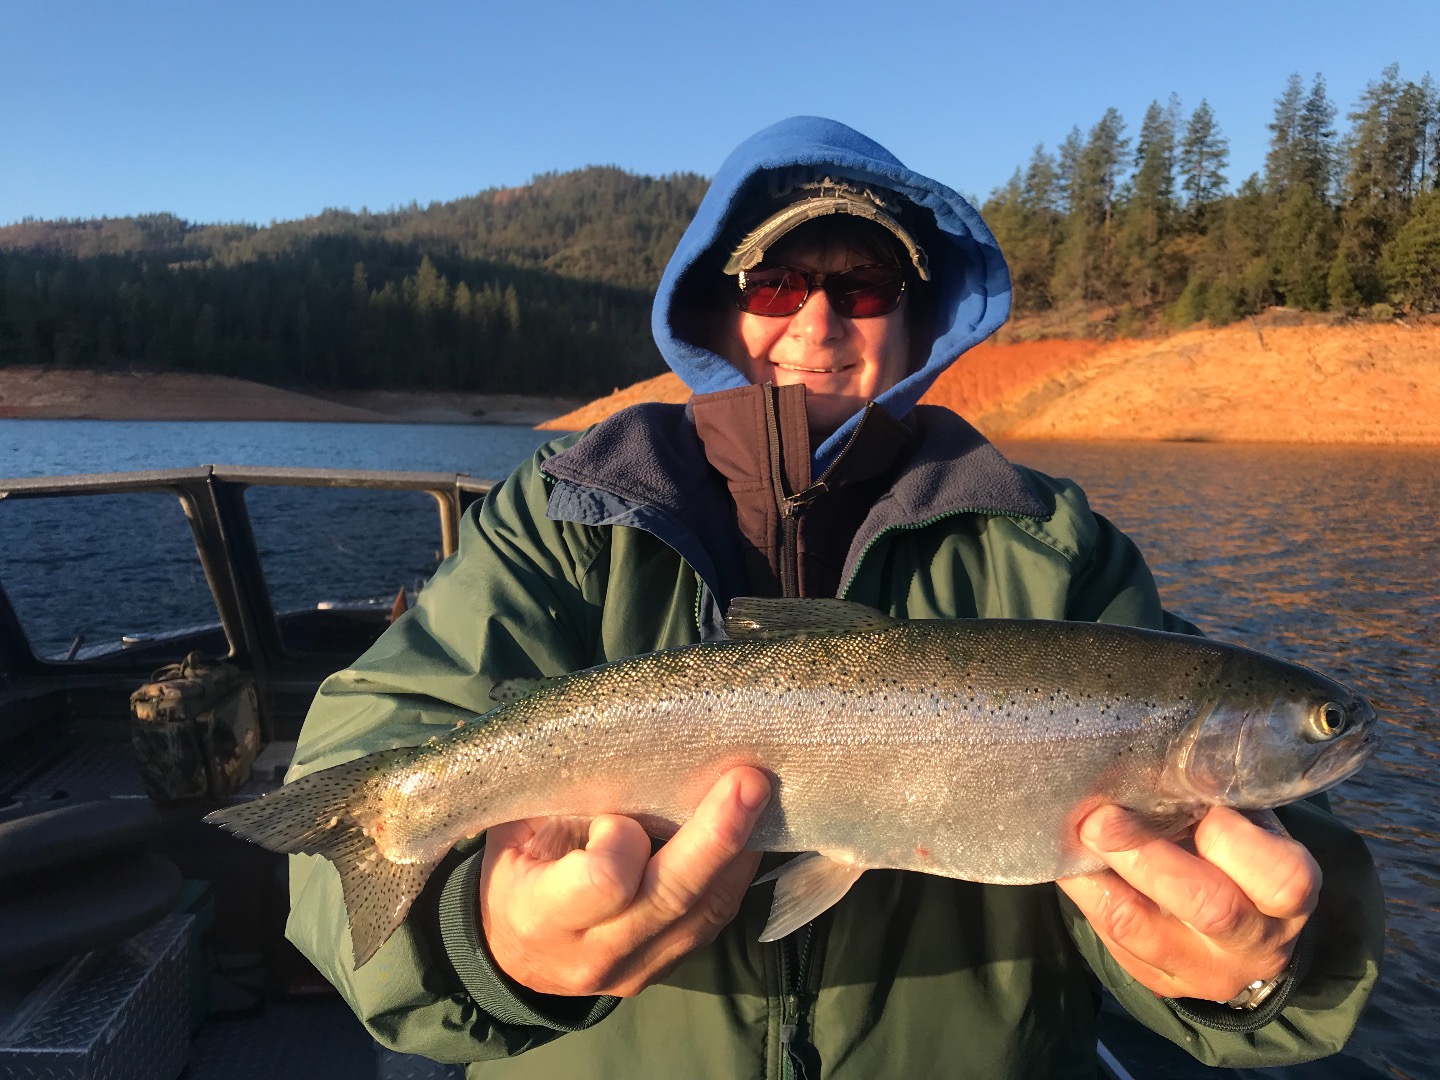 Shasta Lake cools as the trout fishing heats up!